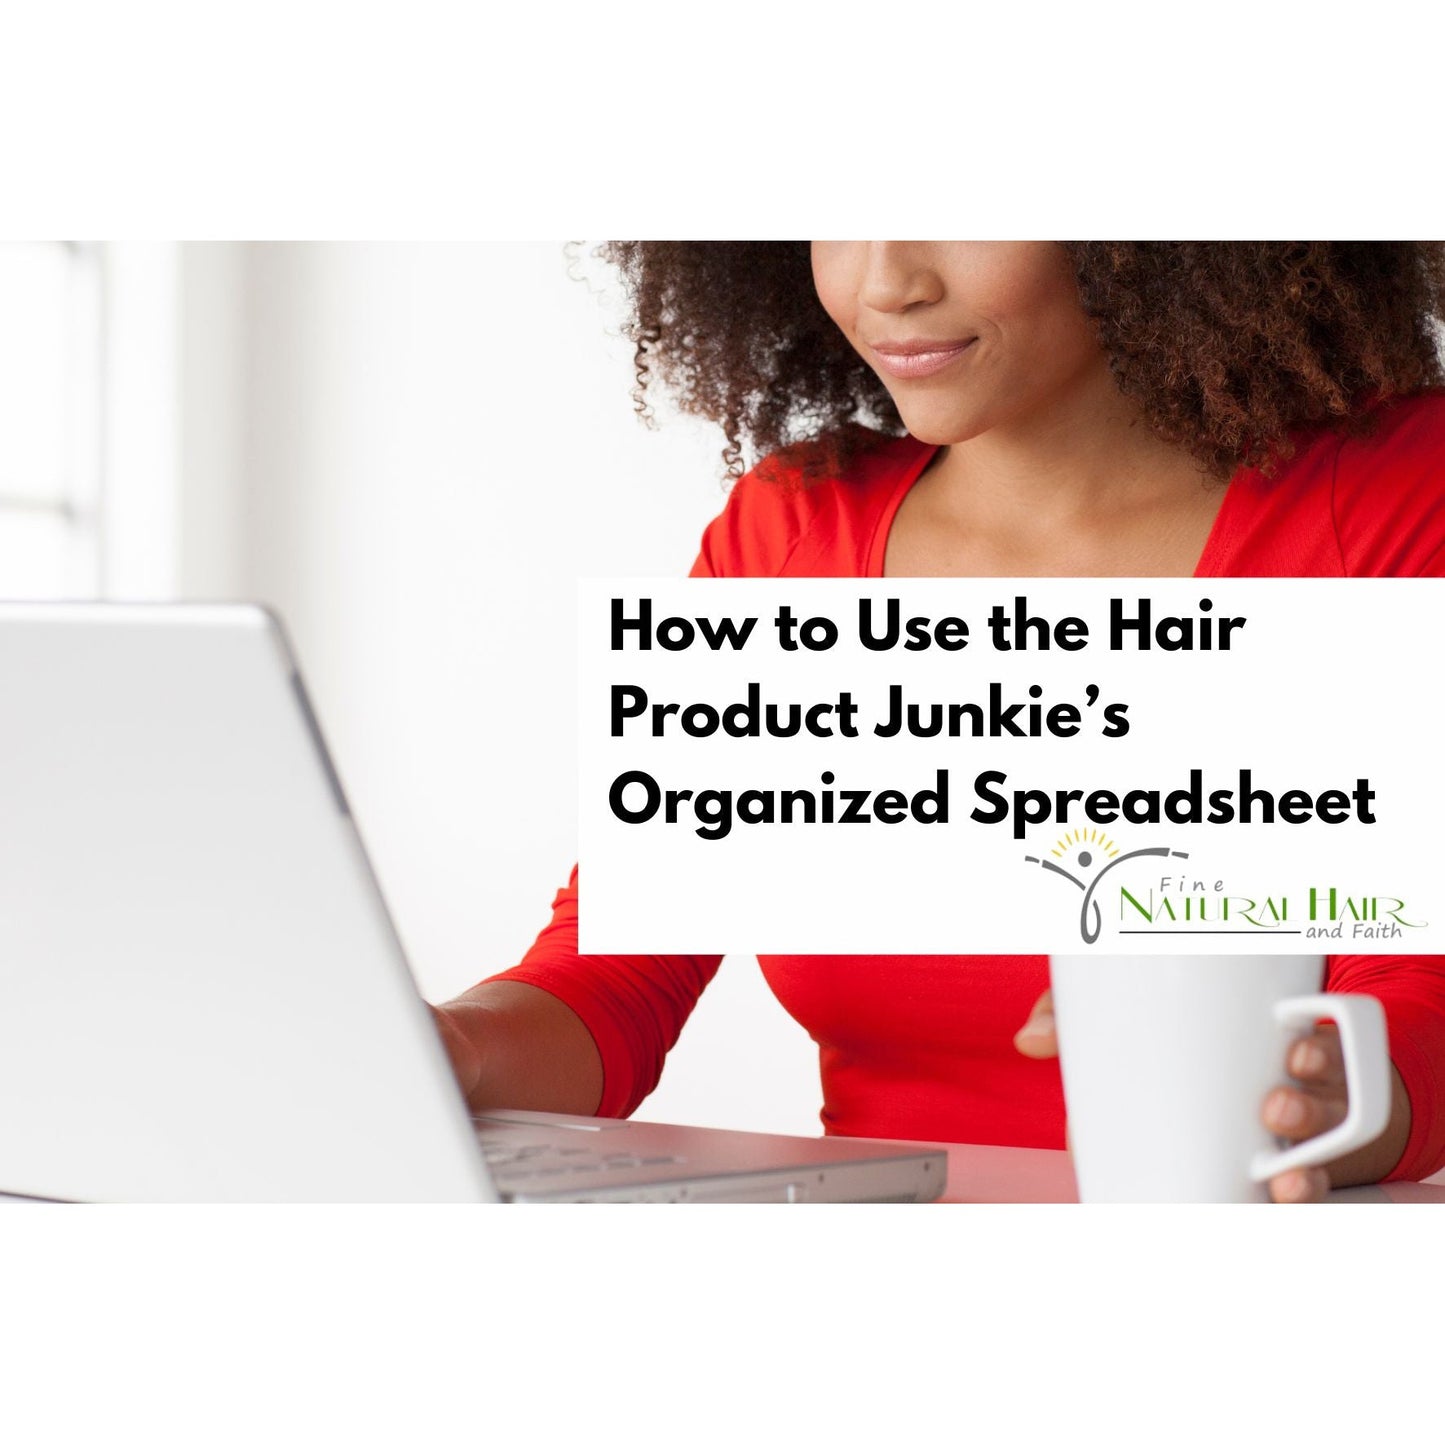 THE PRODUCT JUNKIE'S ORGANIZED SPREADSHEET